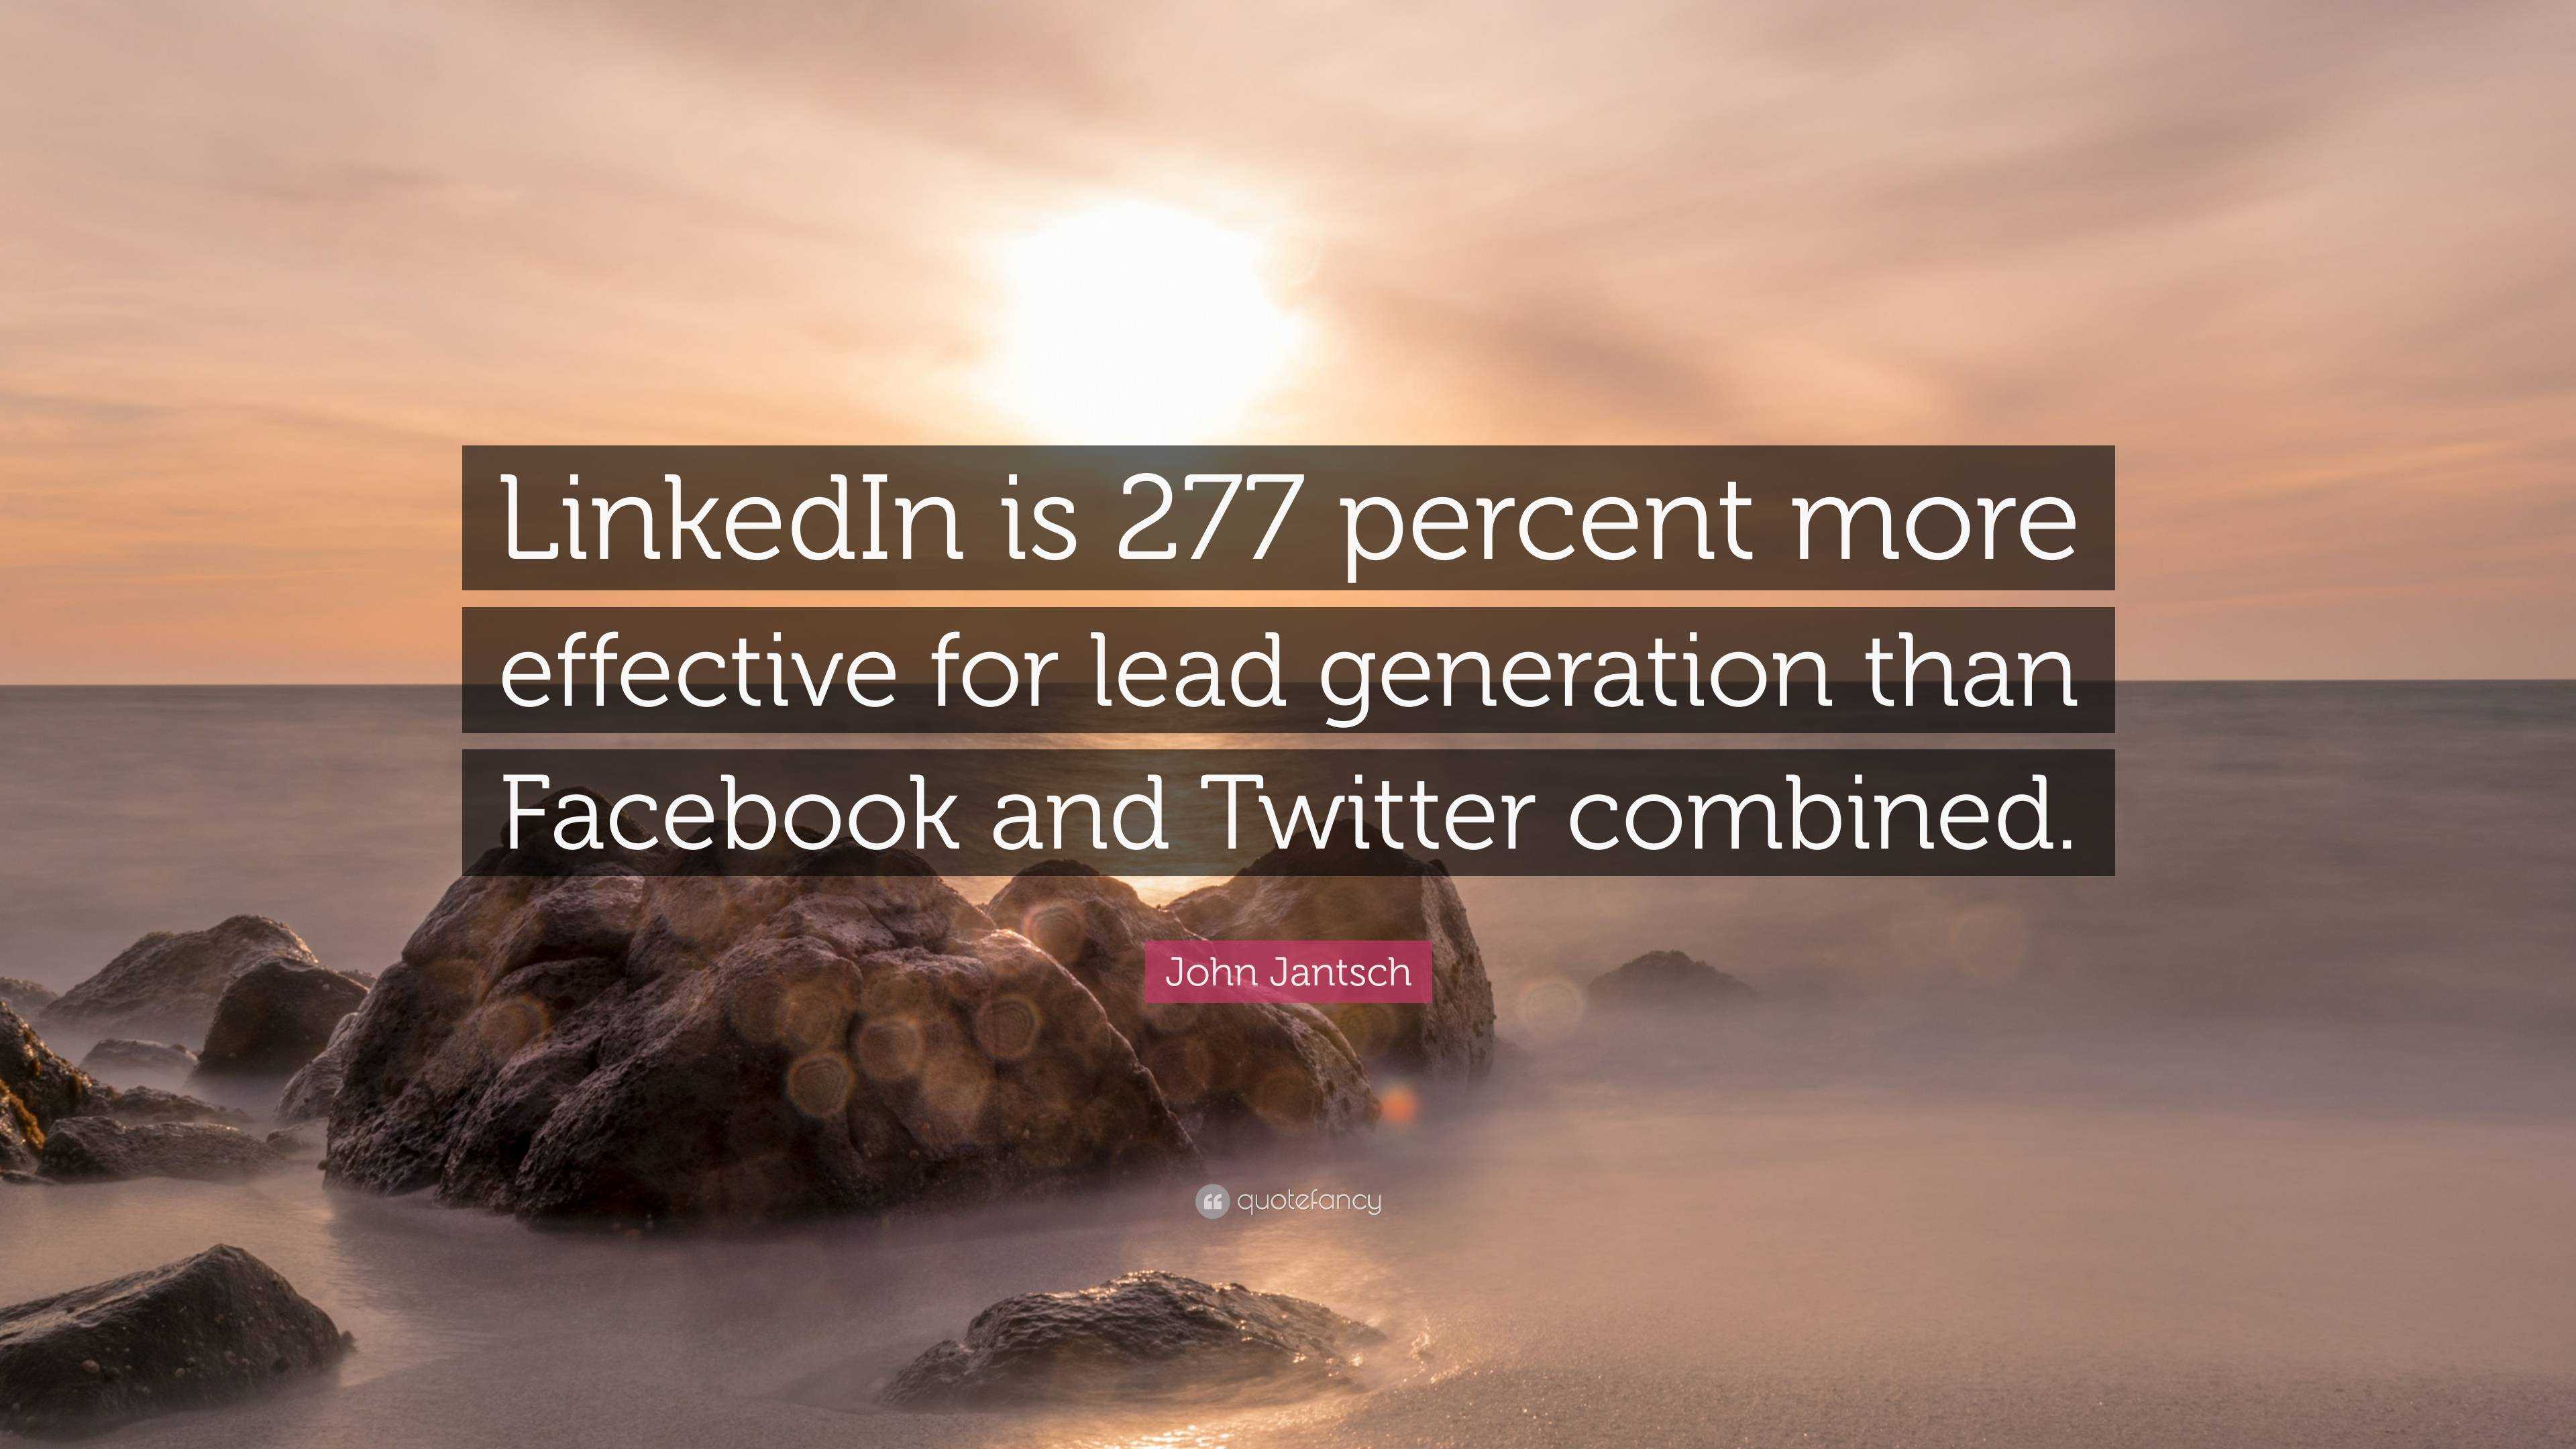 John Quote: “LinkedIn 277 percent effective for lead generation than Facebook and Twitter